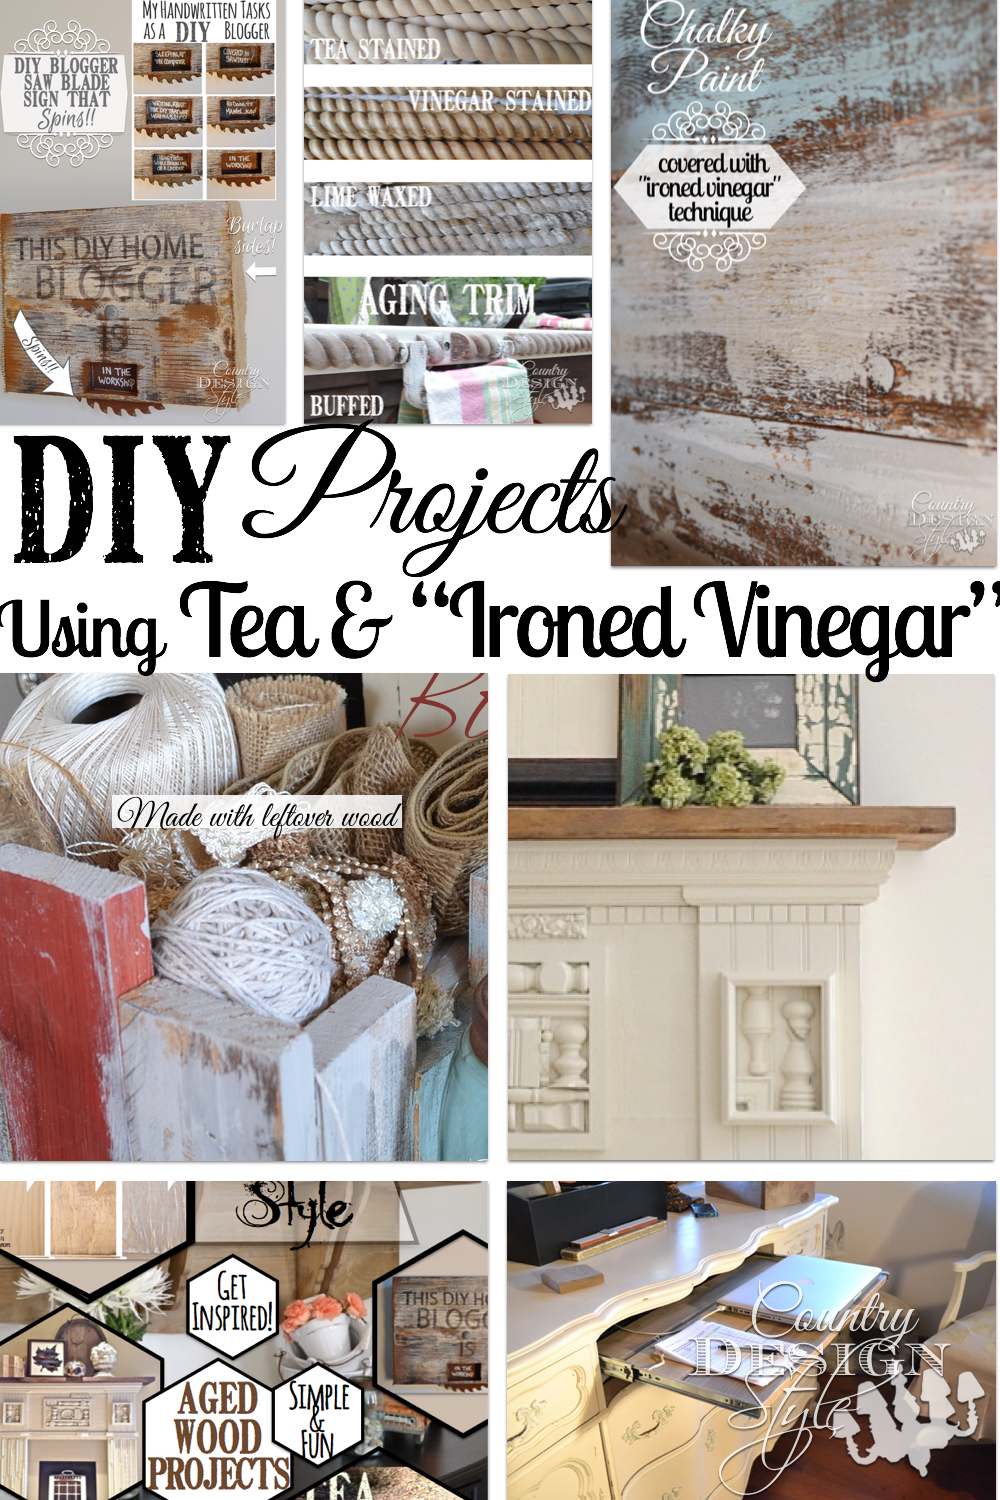 How to age wood for rustic diy farmhouse style projects and a collection of "AGED" wood projects.  Country Design Style